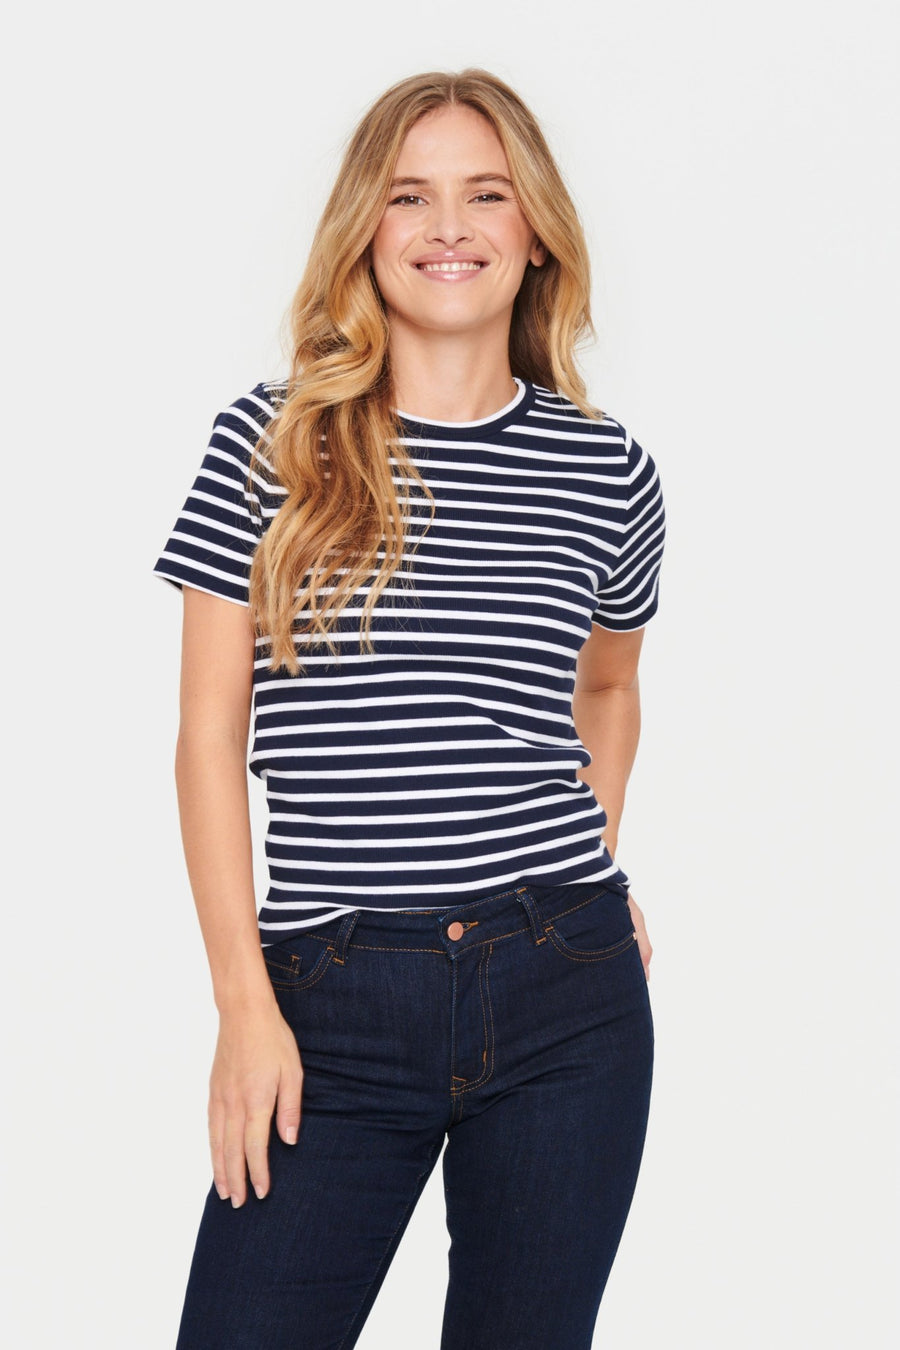 Aster Striped Tee by Saint Tropez - Blue Sky Fashions & Lingerie